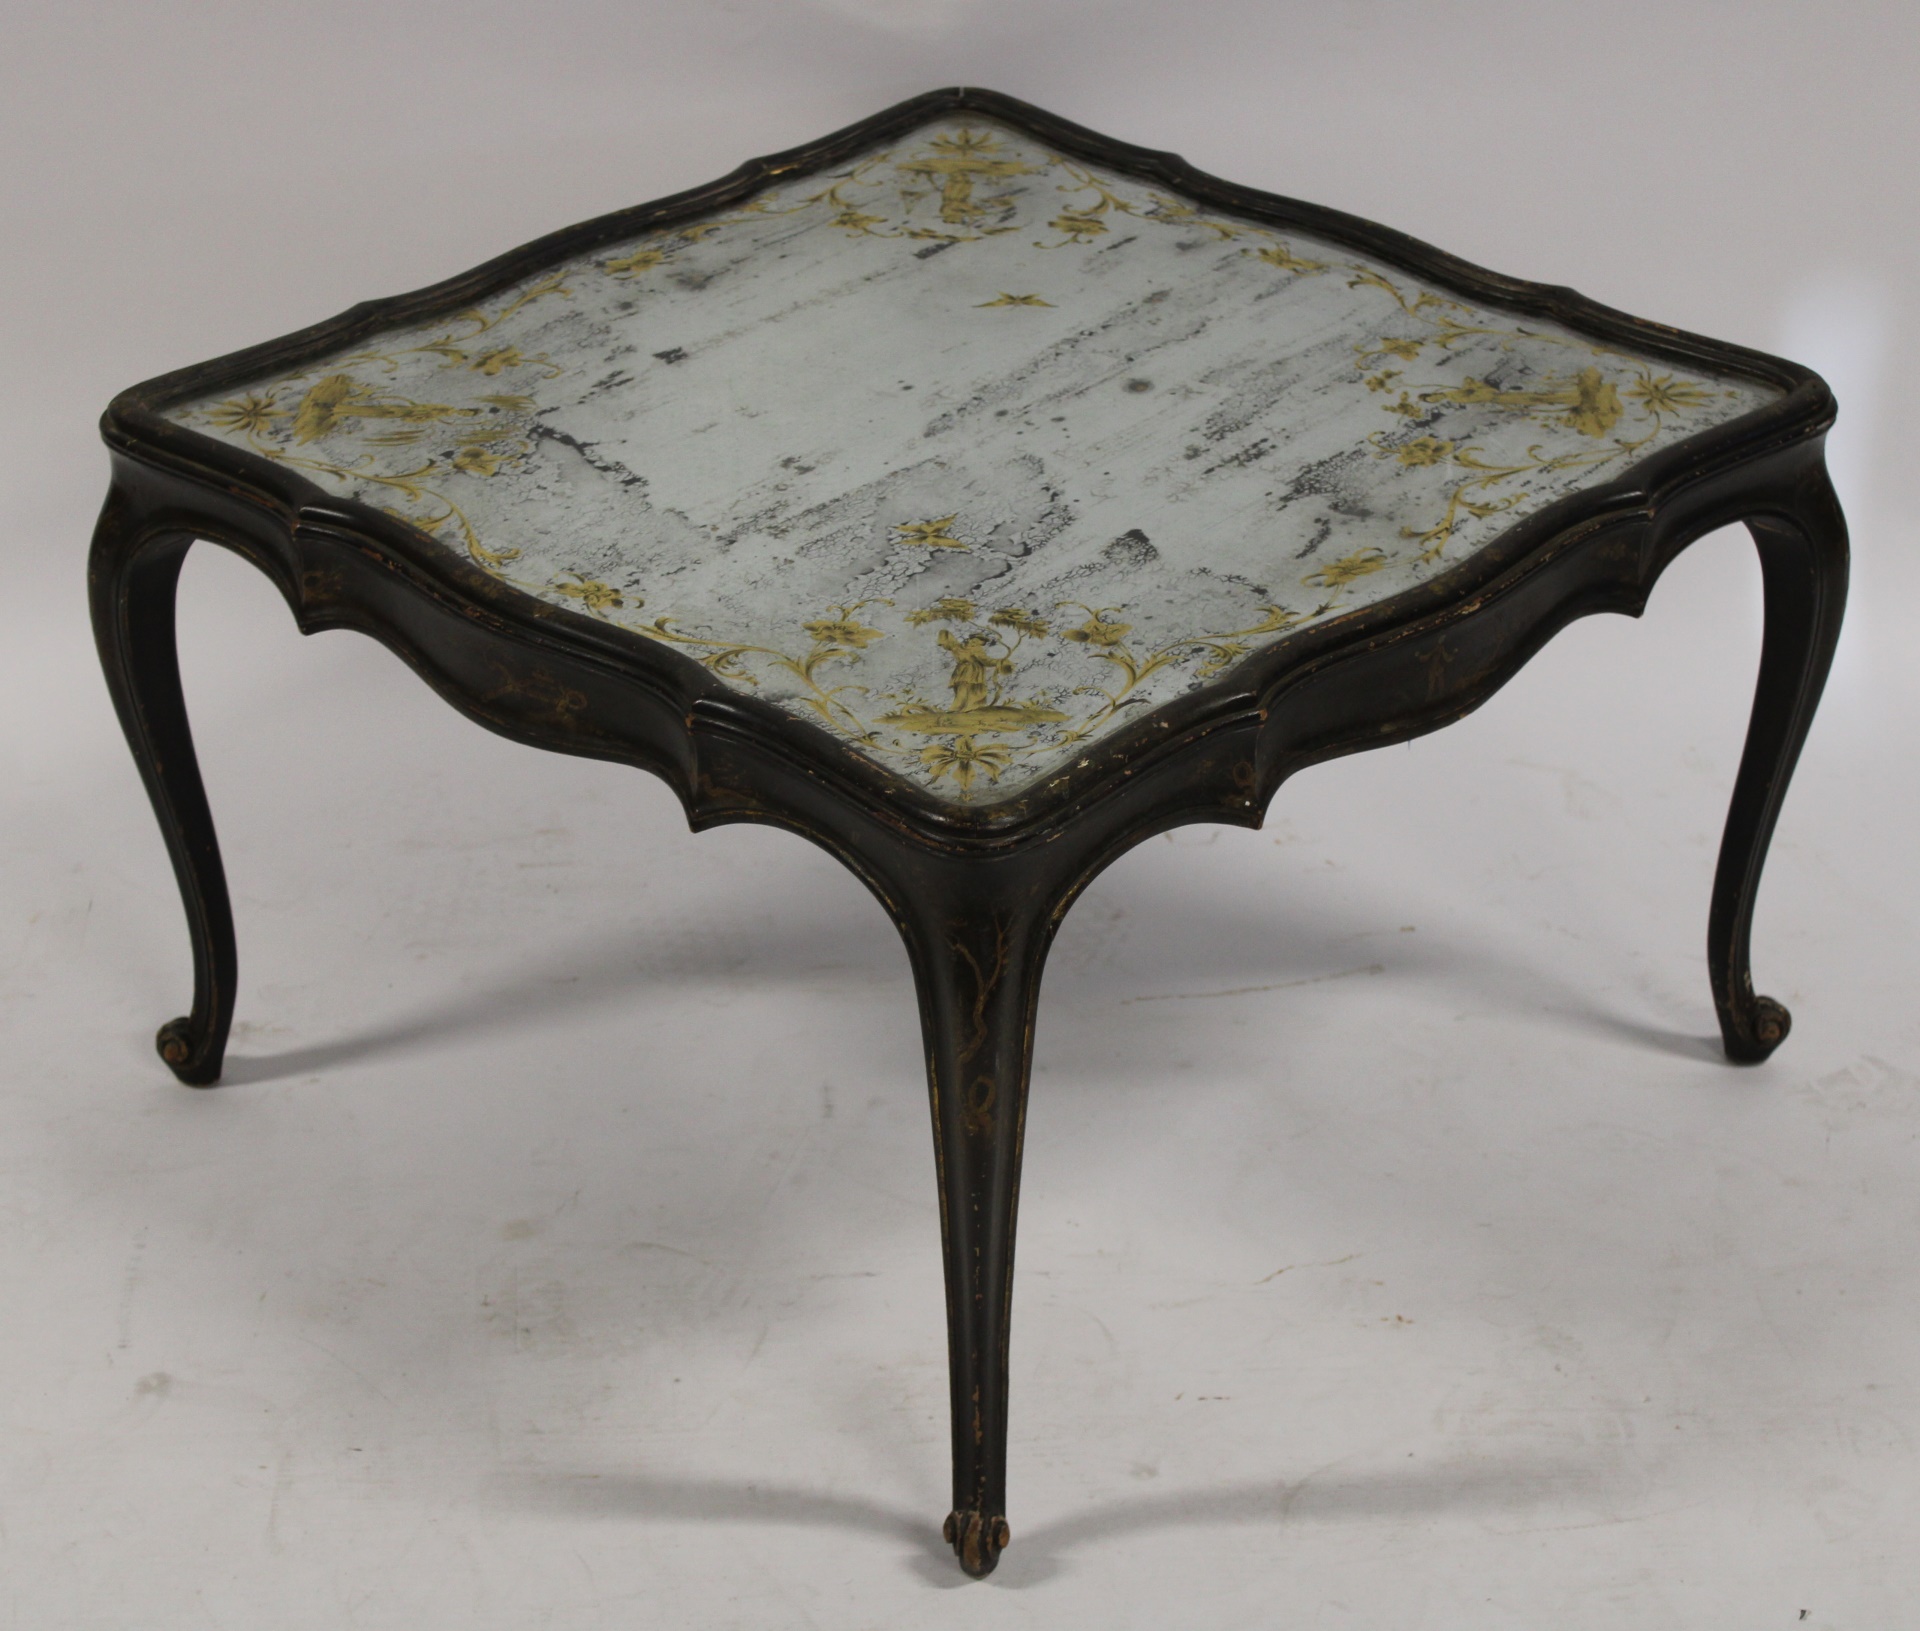 MIDCENTURY COFFEE TABLE WITH CHINOISERIE 3b8da8